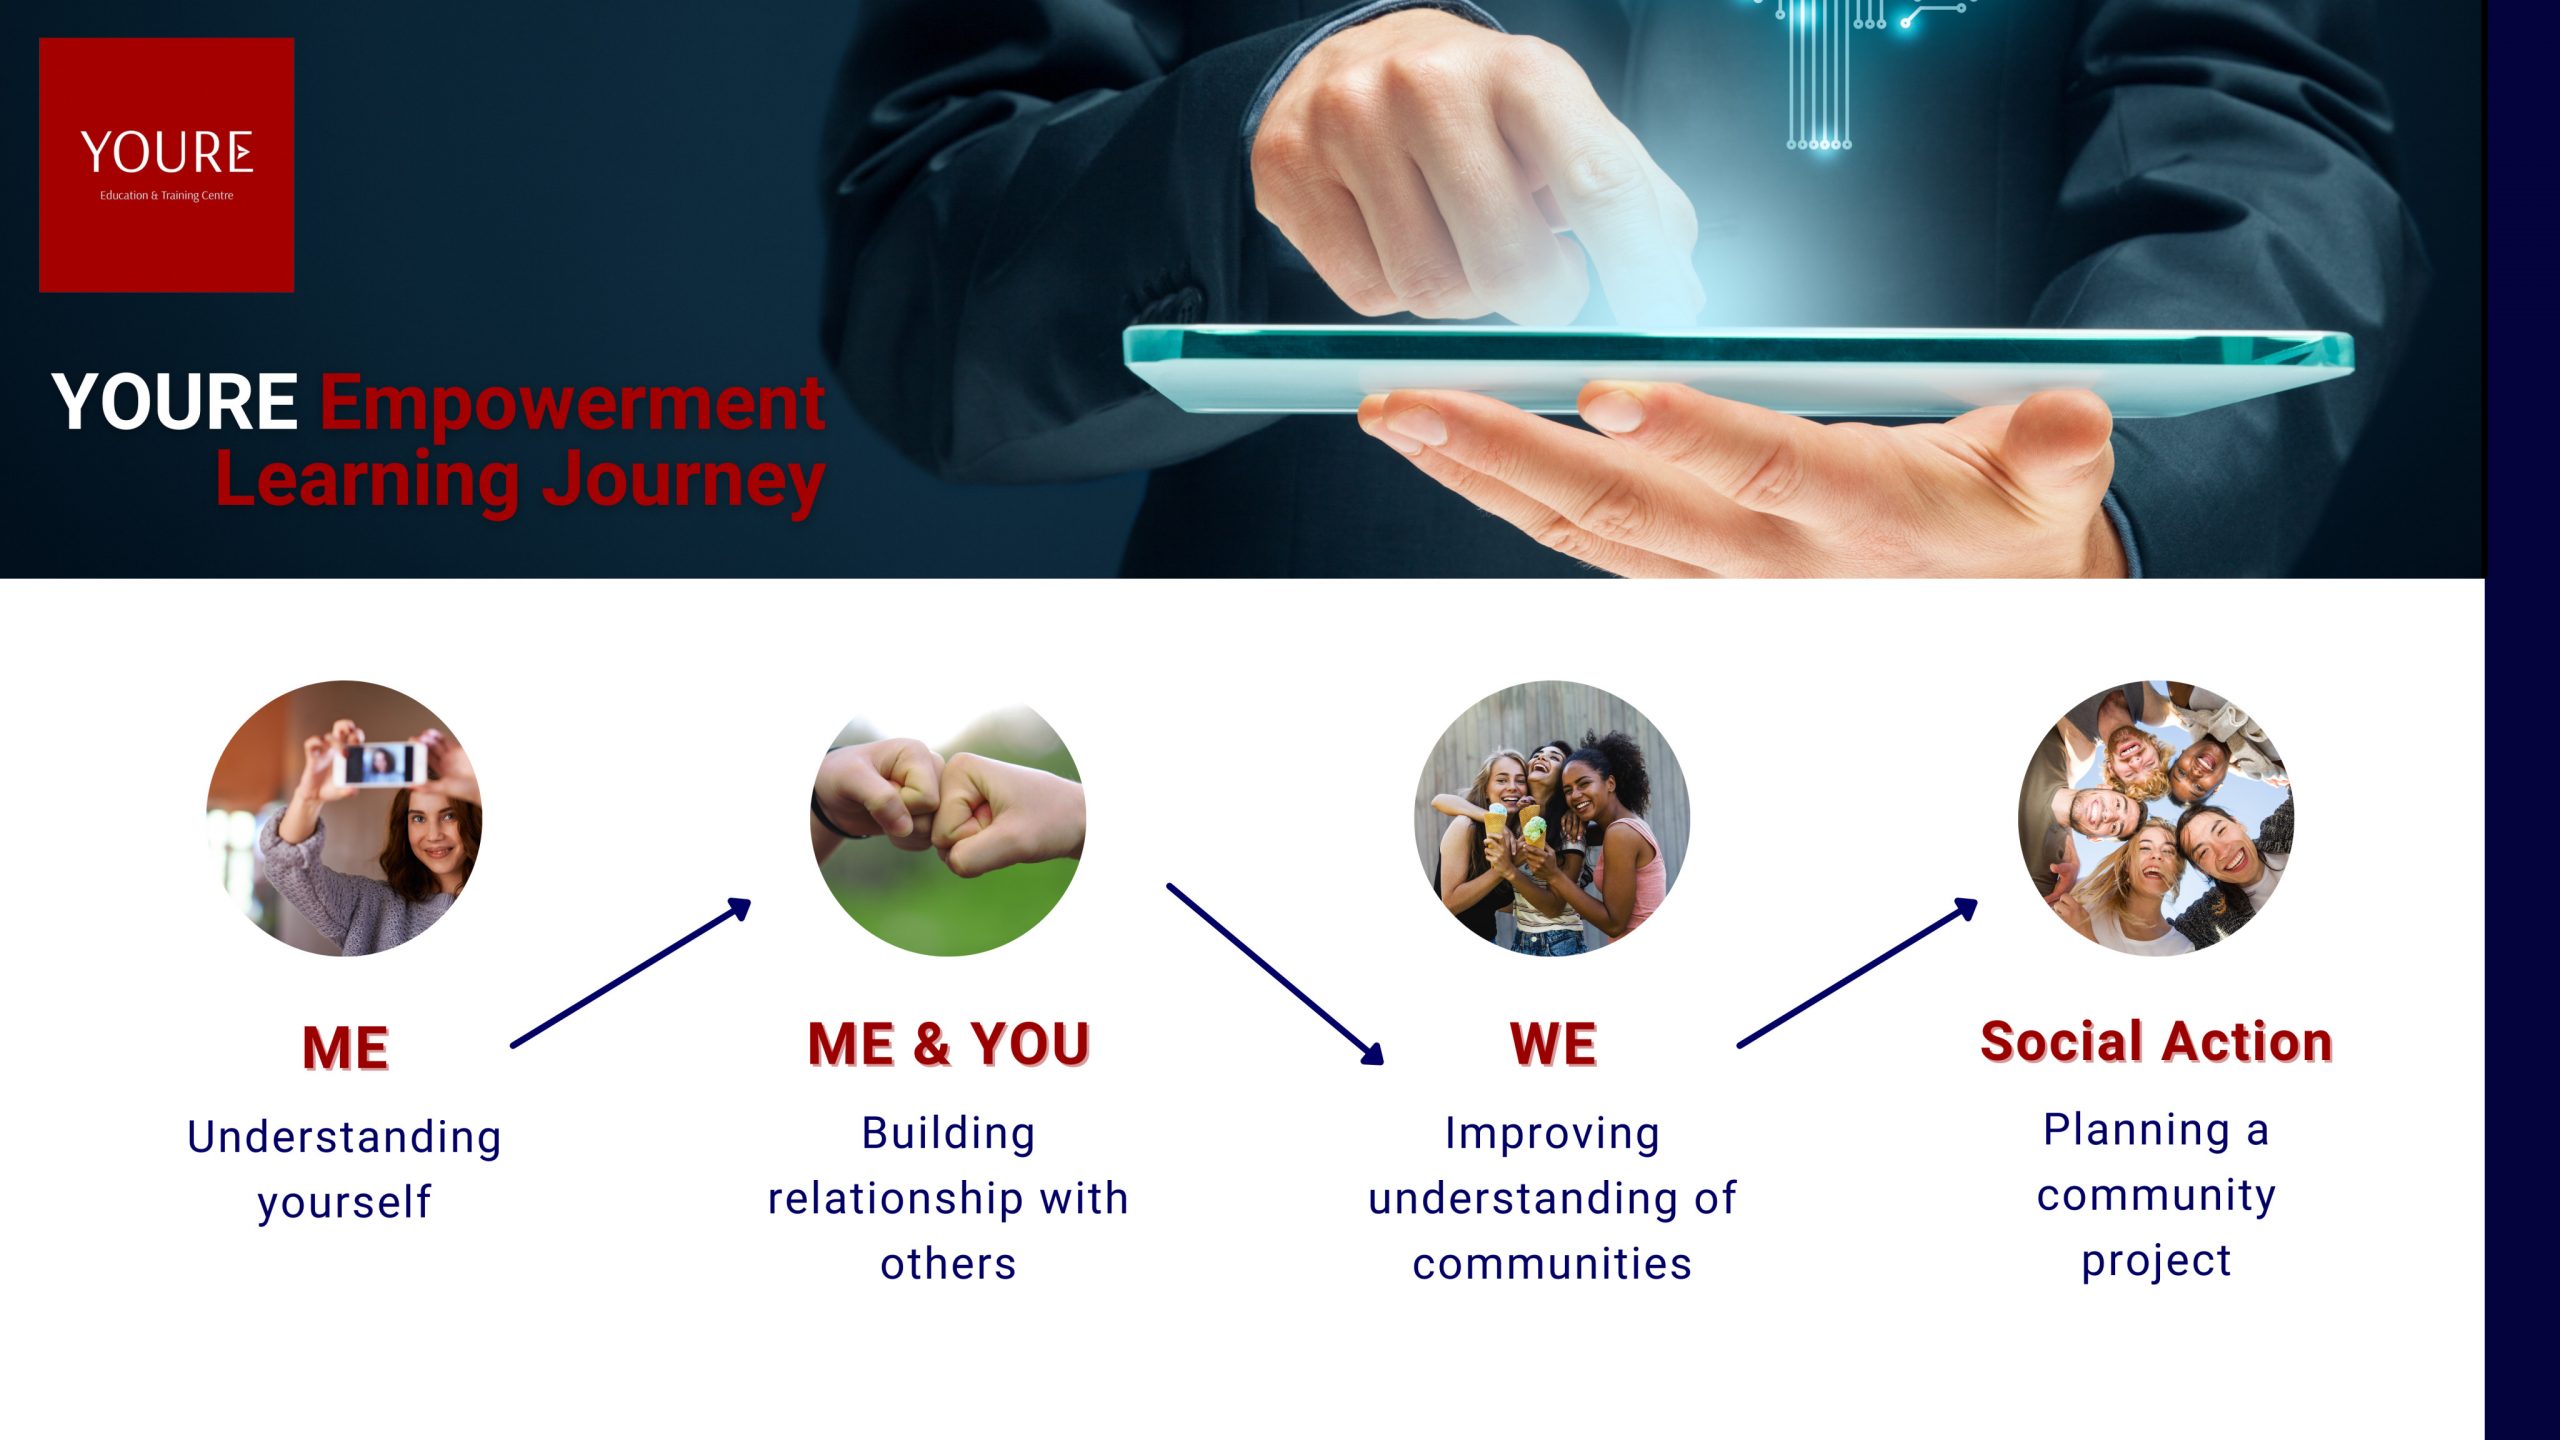 03- The learning journey - YOURE employment